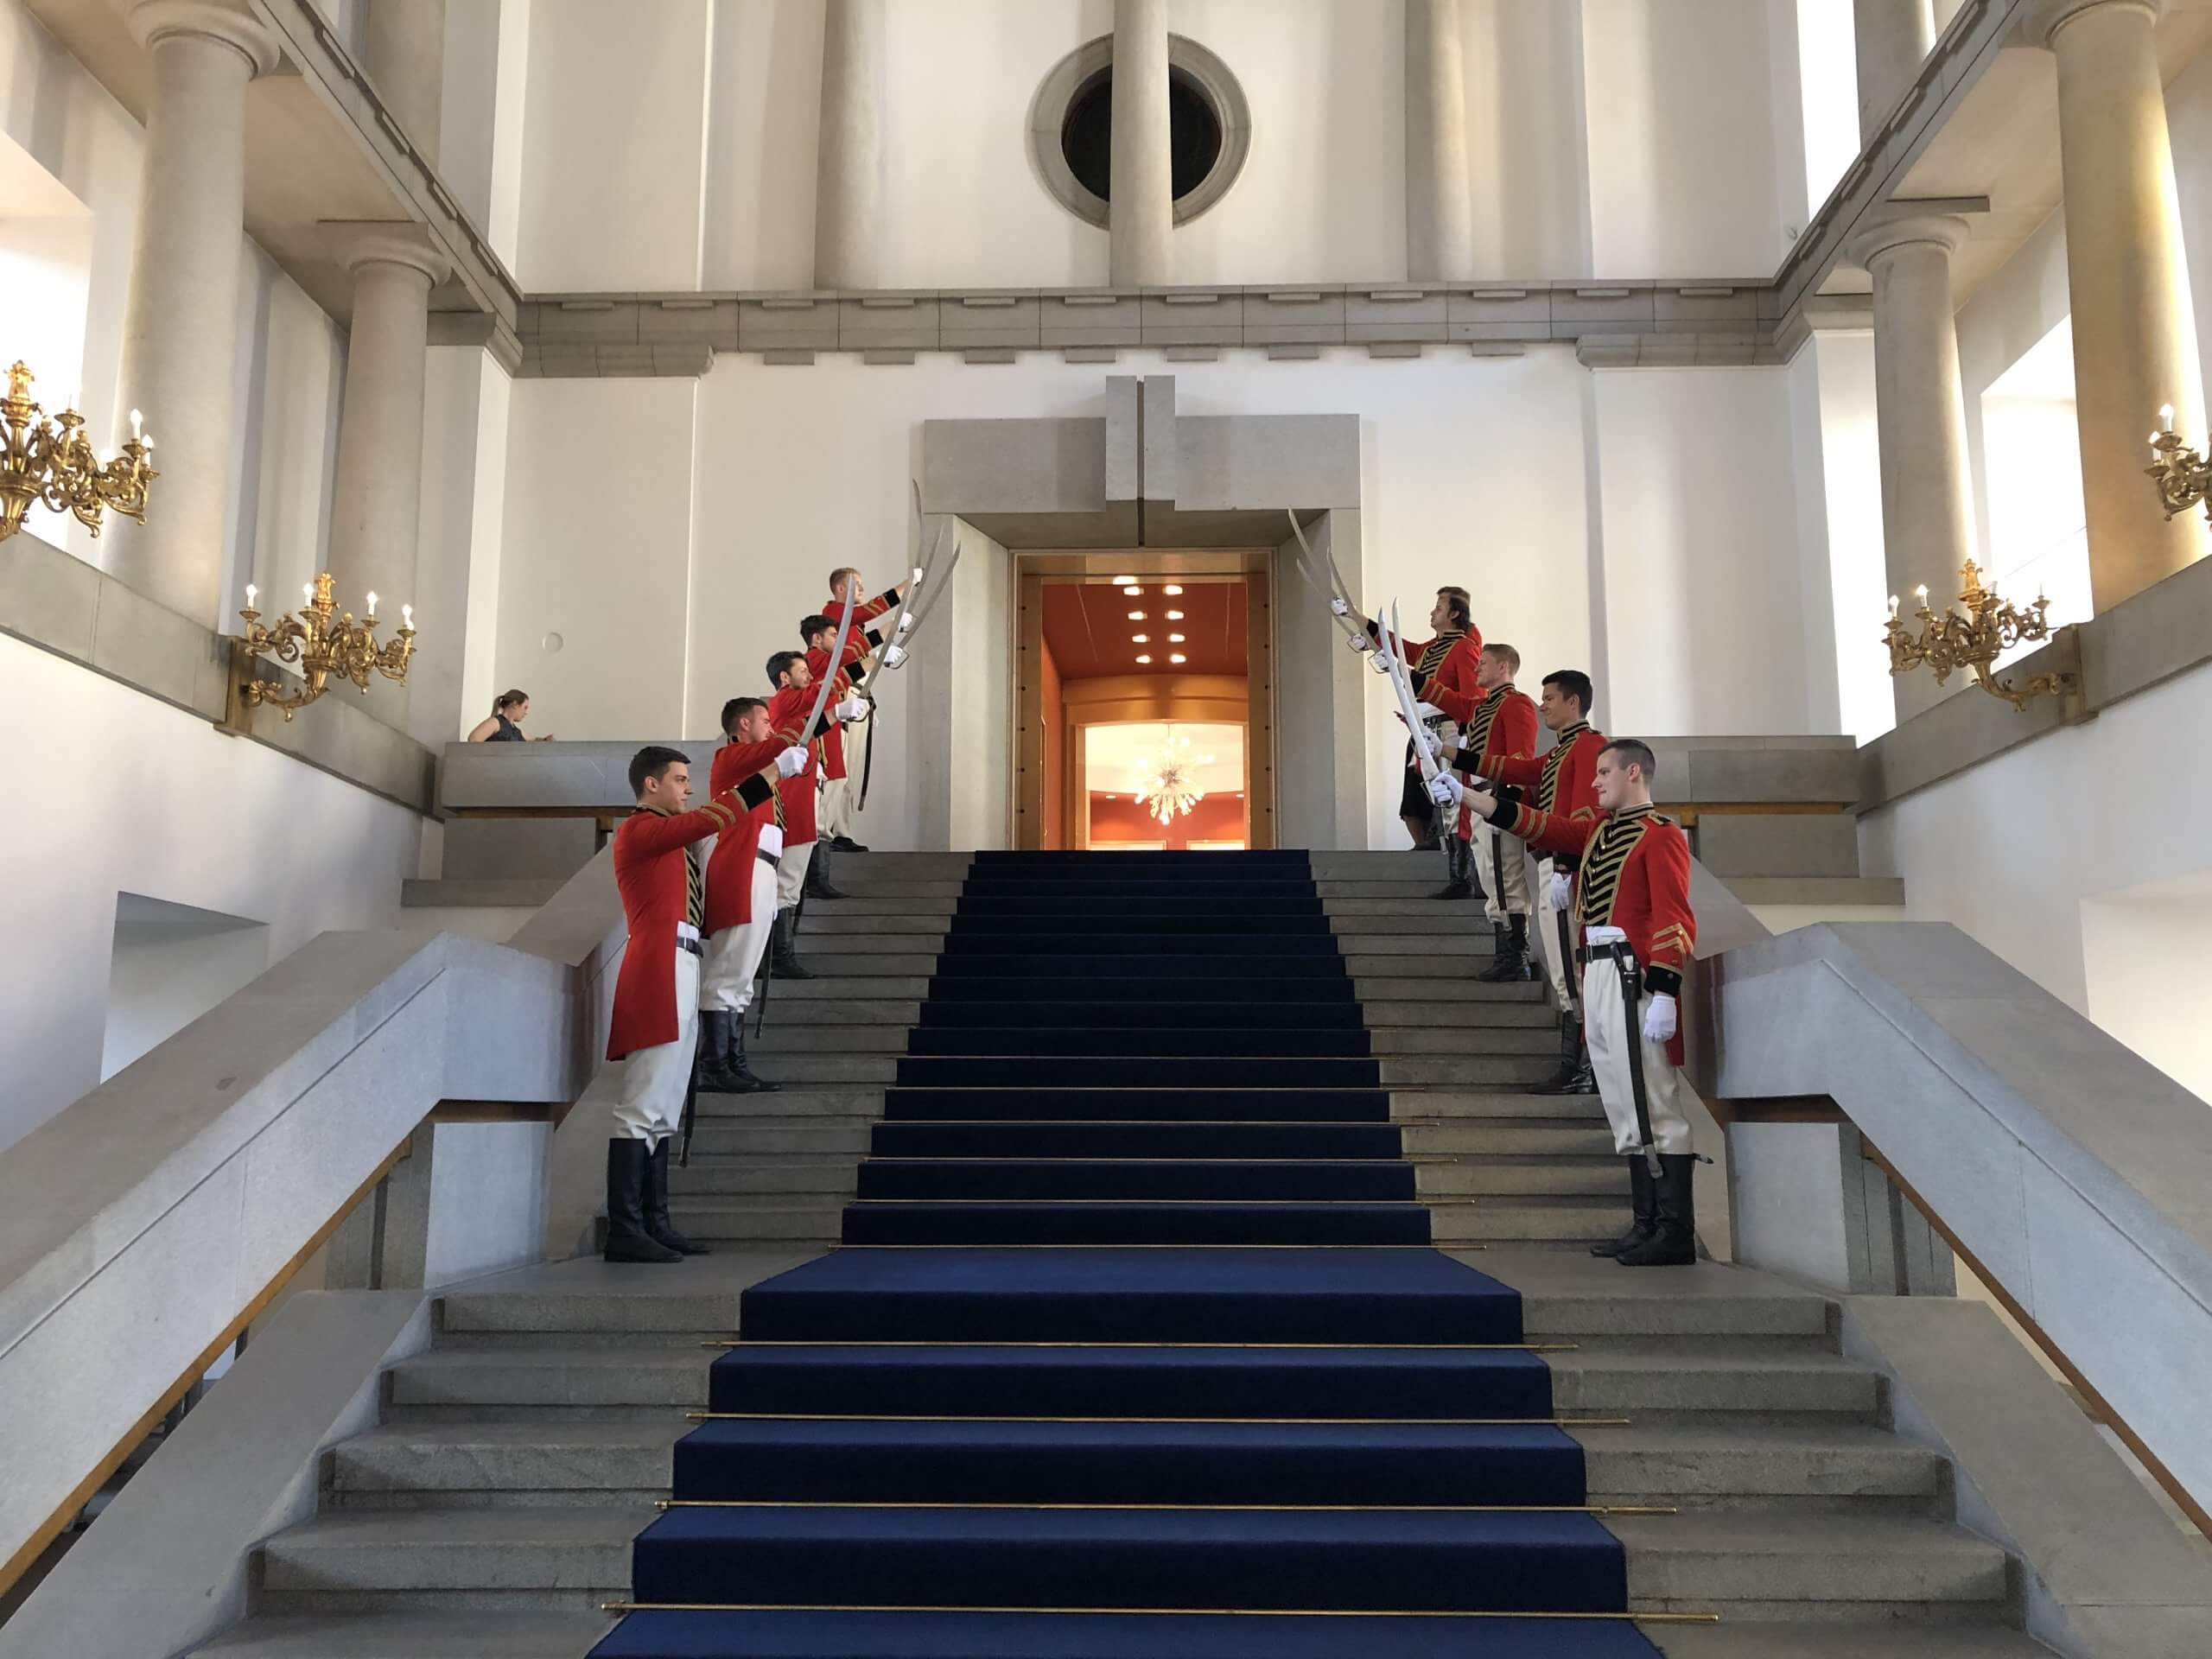 Czech soldiers on staircase for American Express event